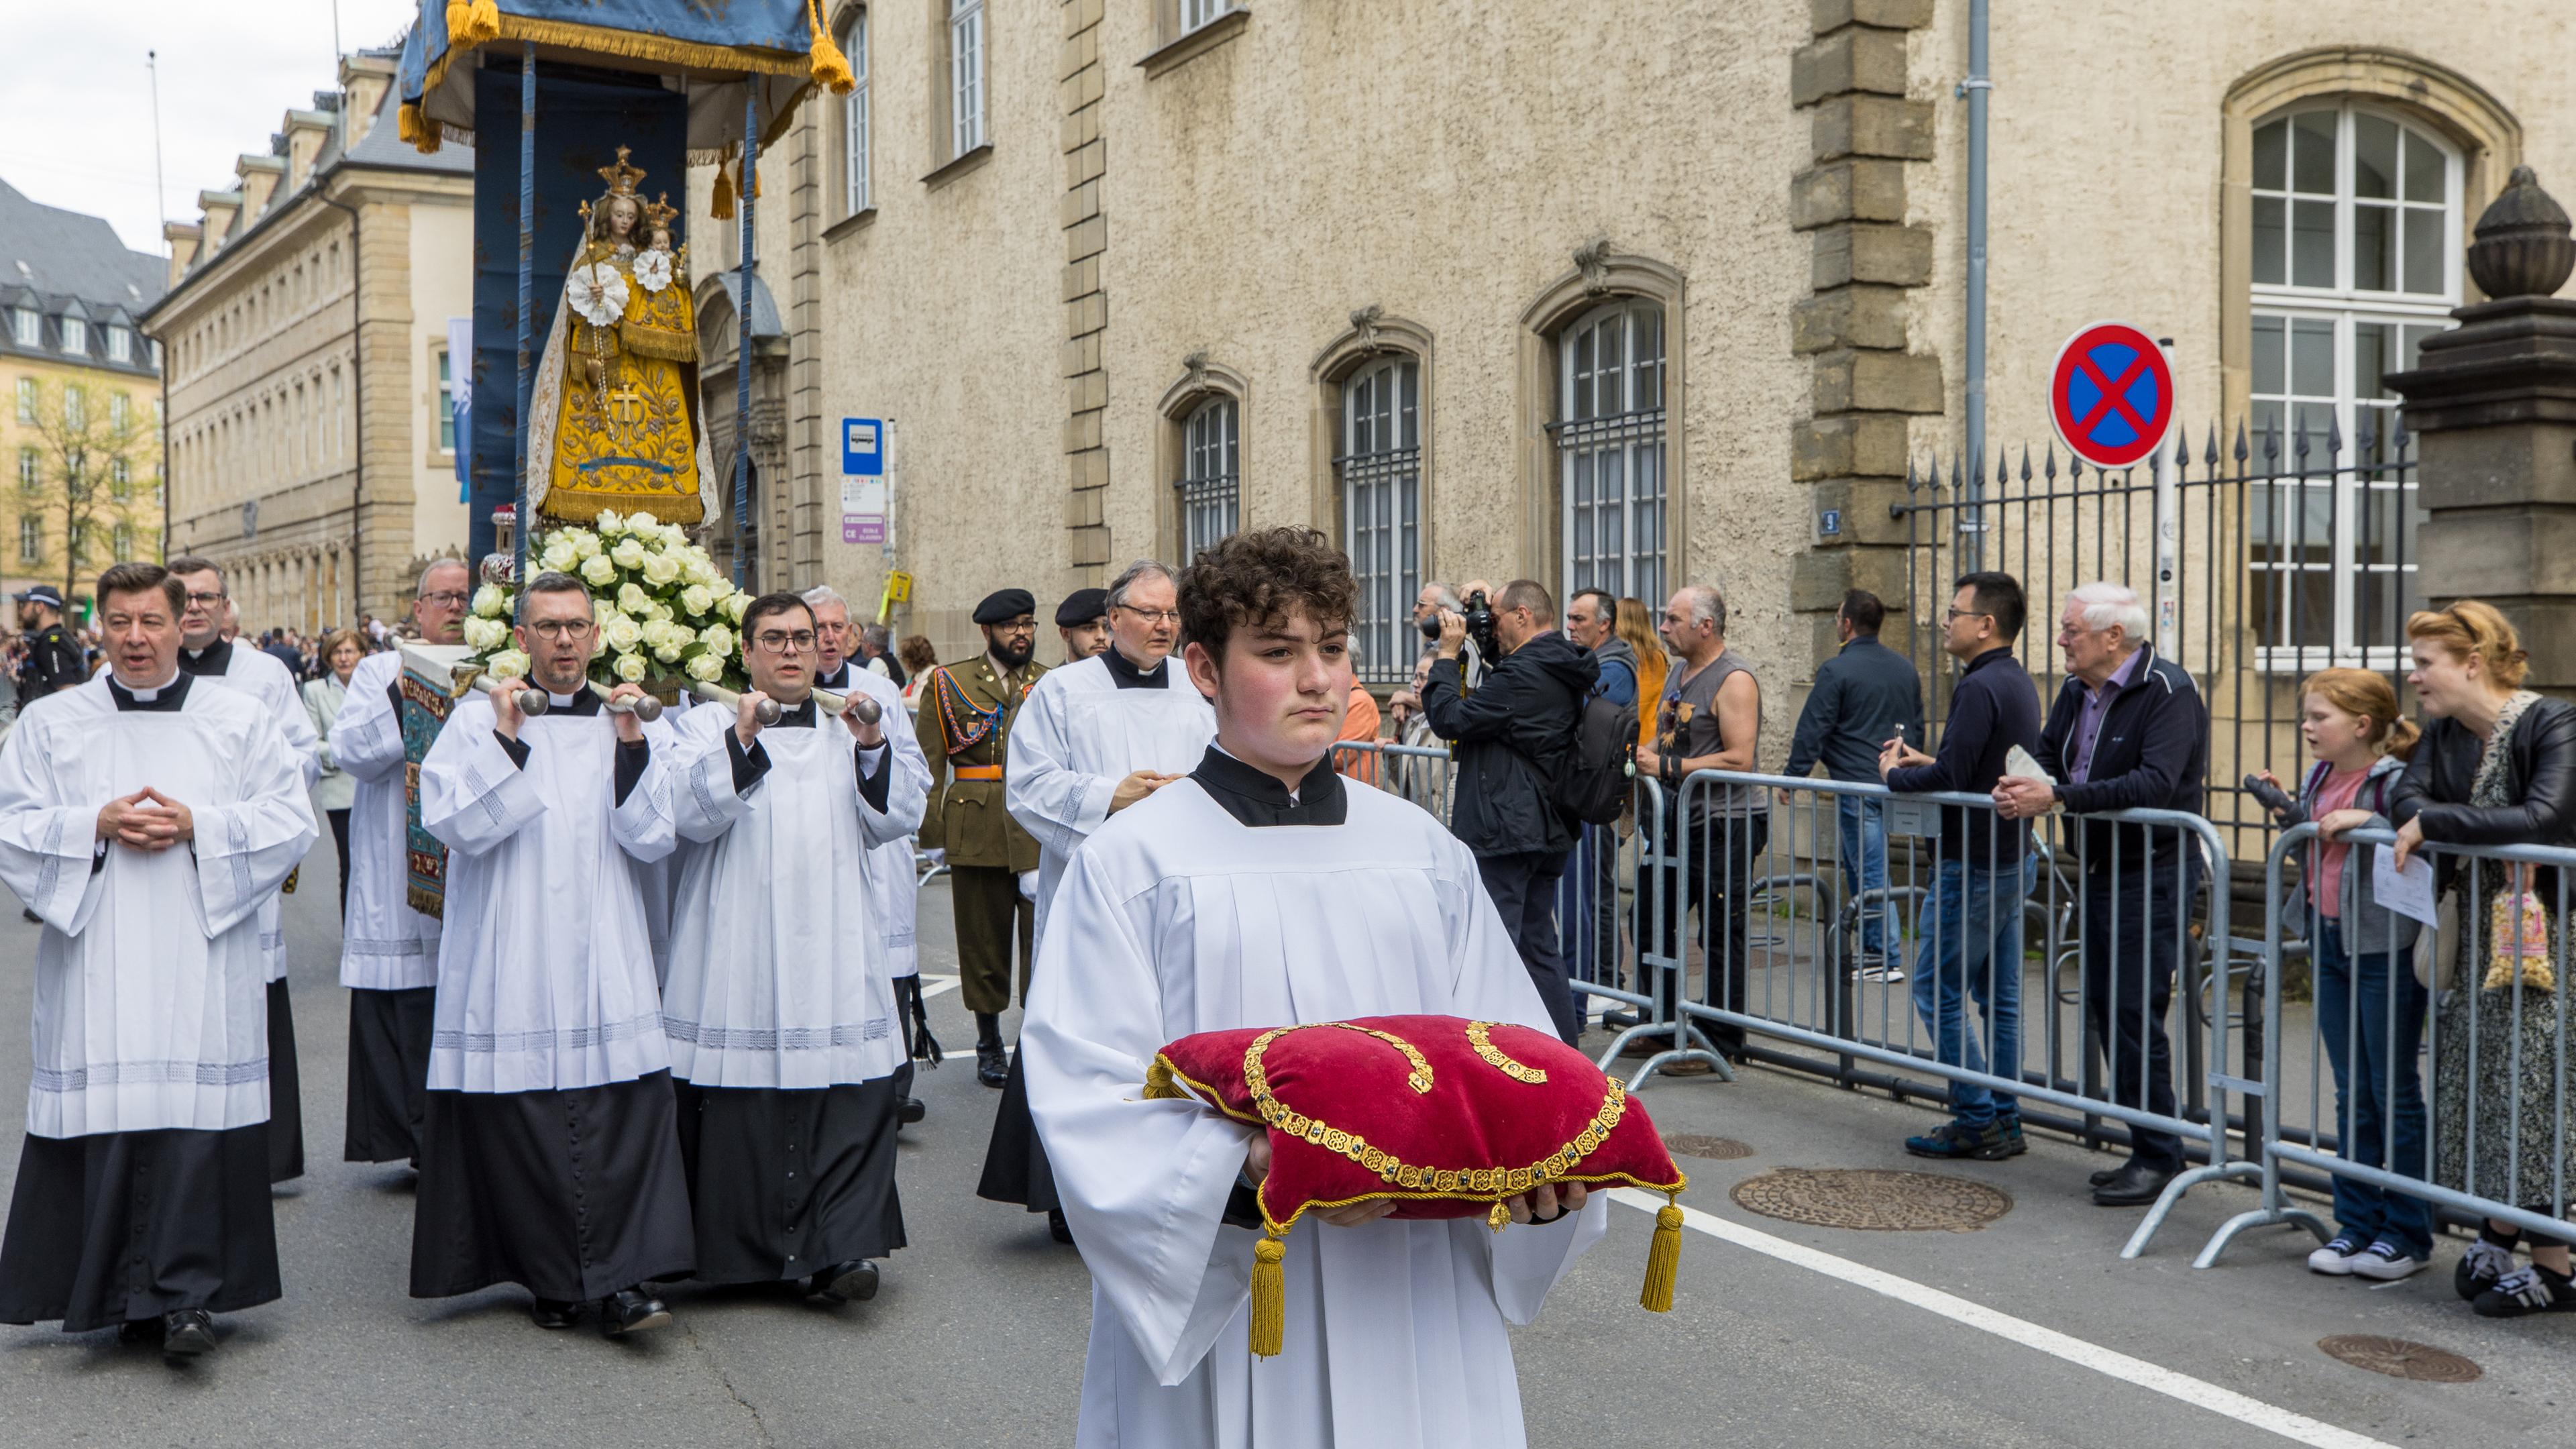 The Oktav procession in Luxembourg 